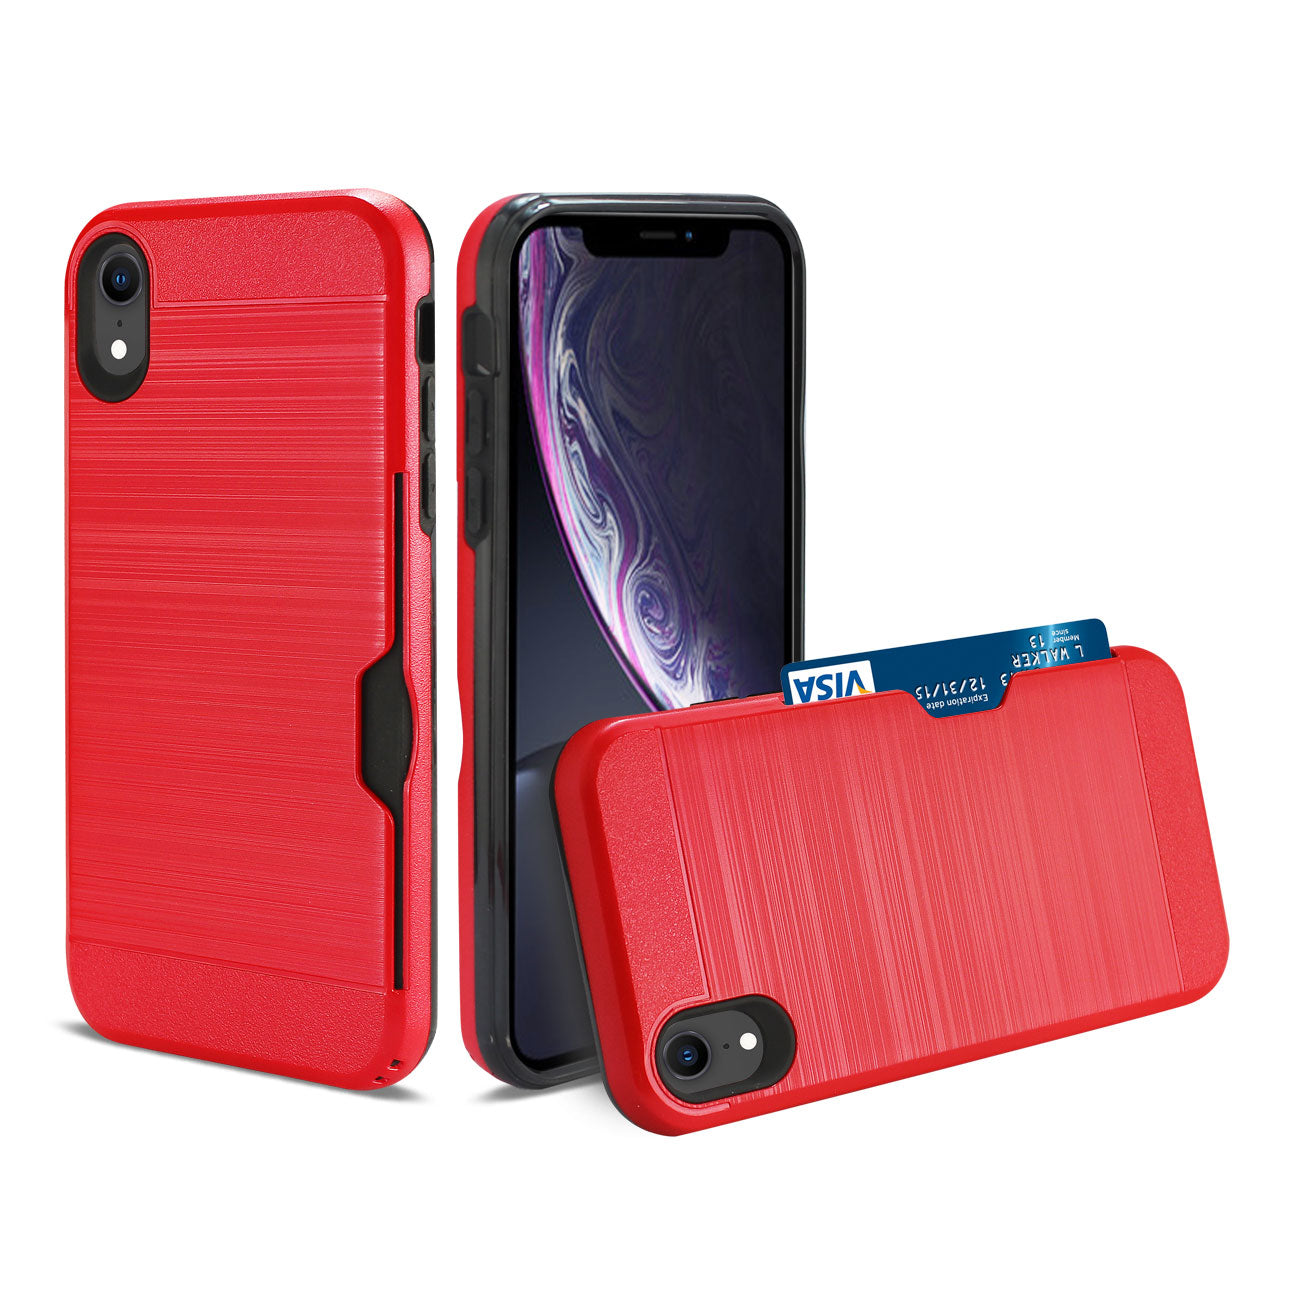 Reiko iPhone XS Max Slim Armor Hybrid Case With Card Holder In Red